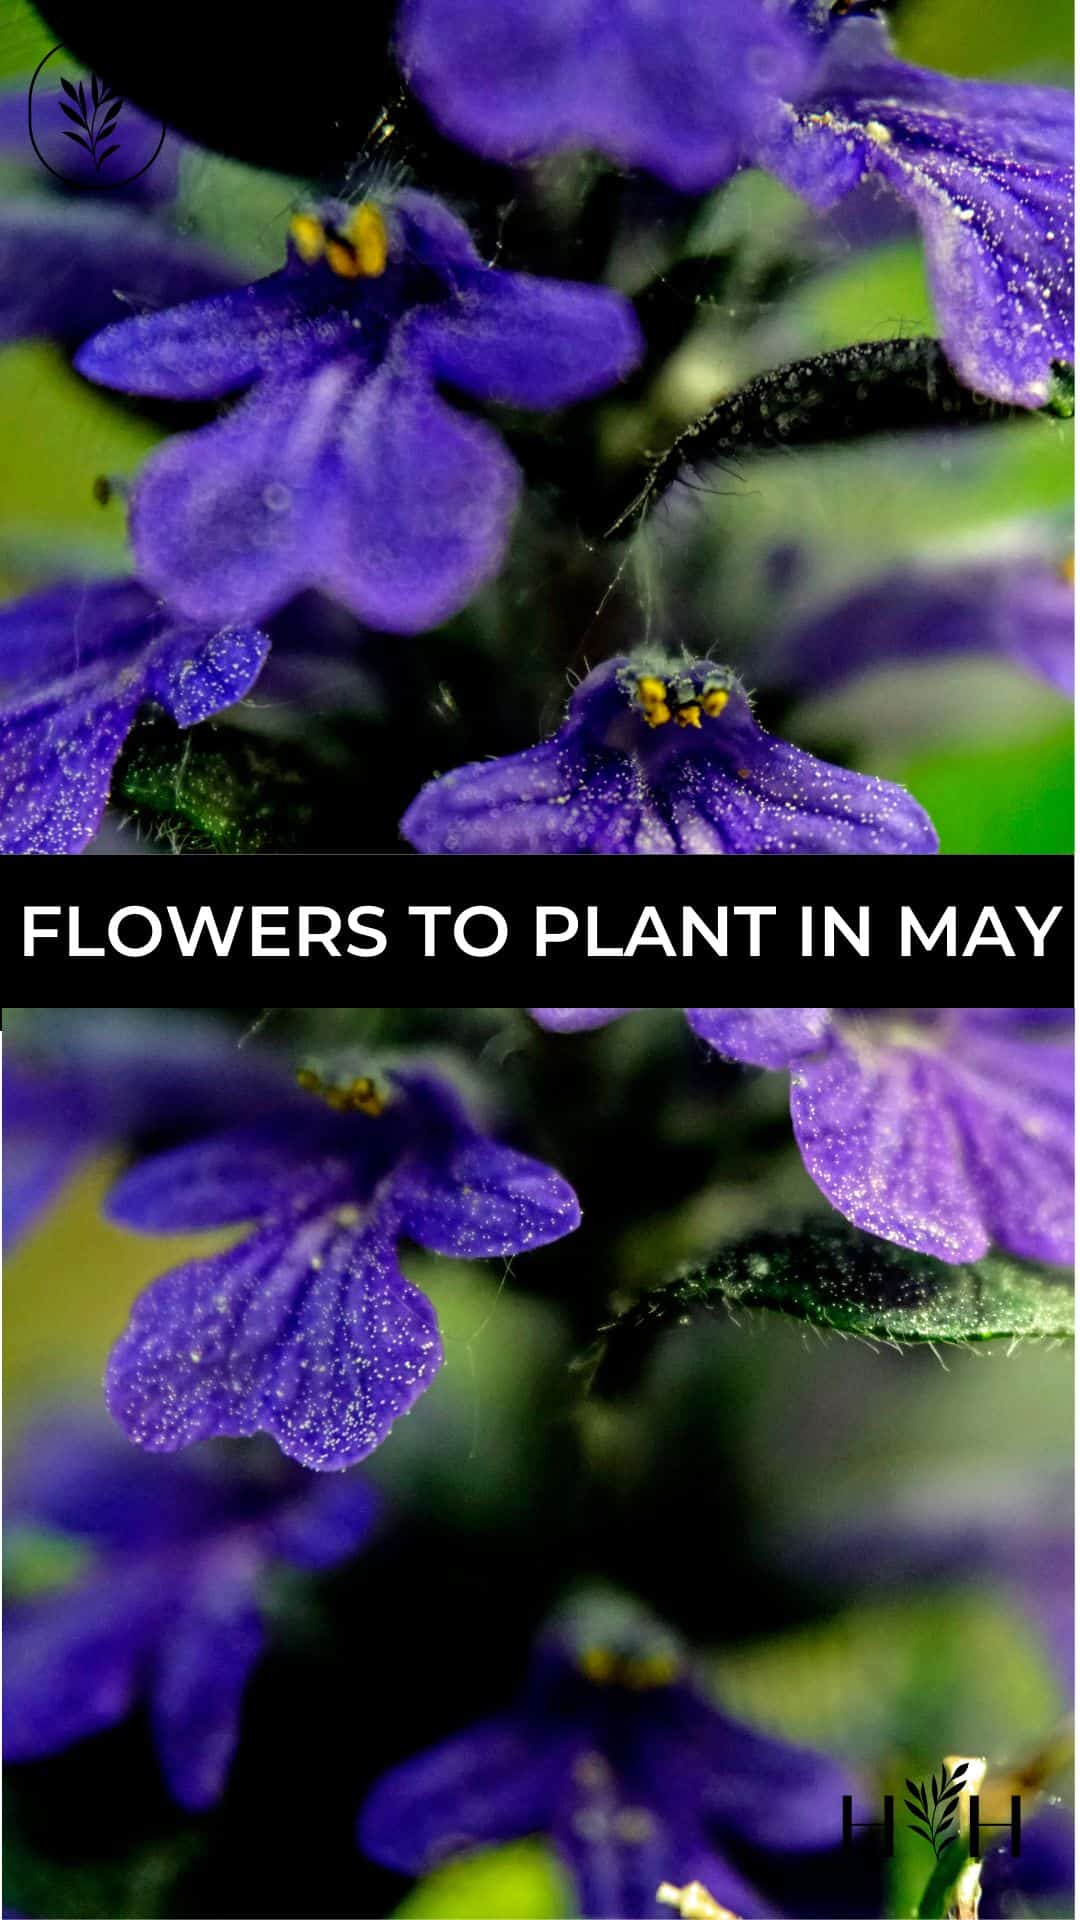 Flowers to plant in may via @home4theharvest